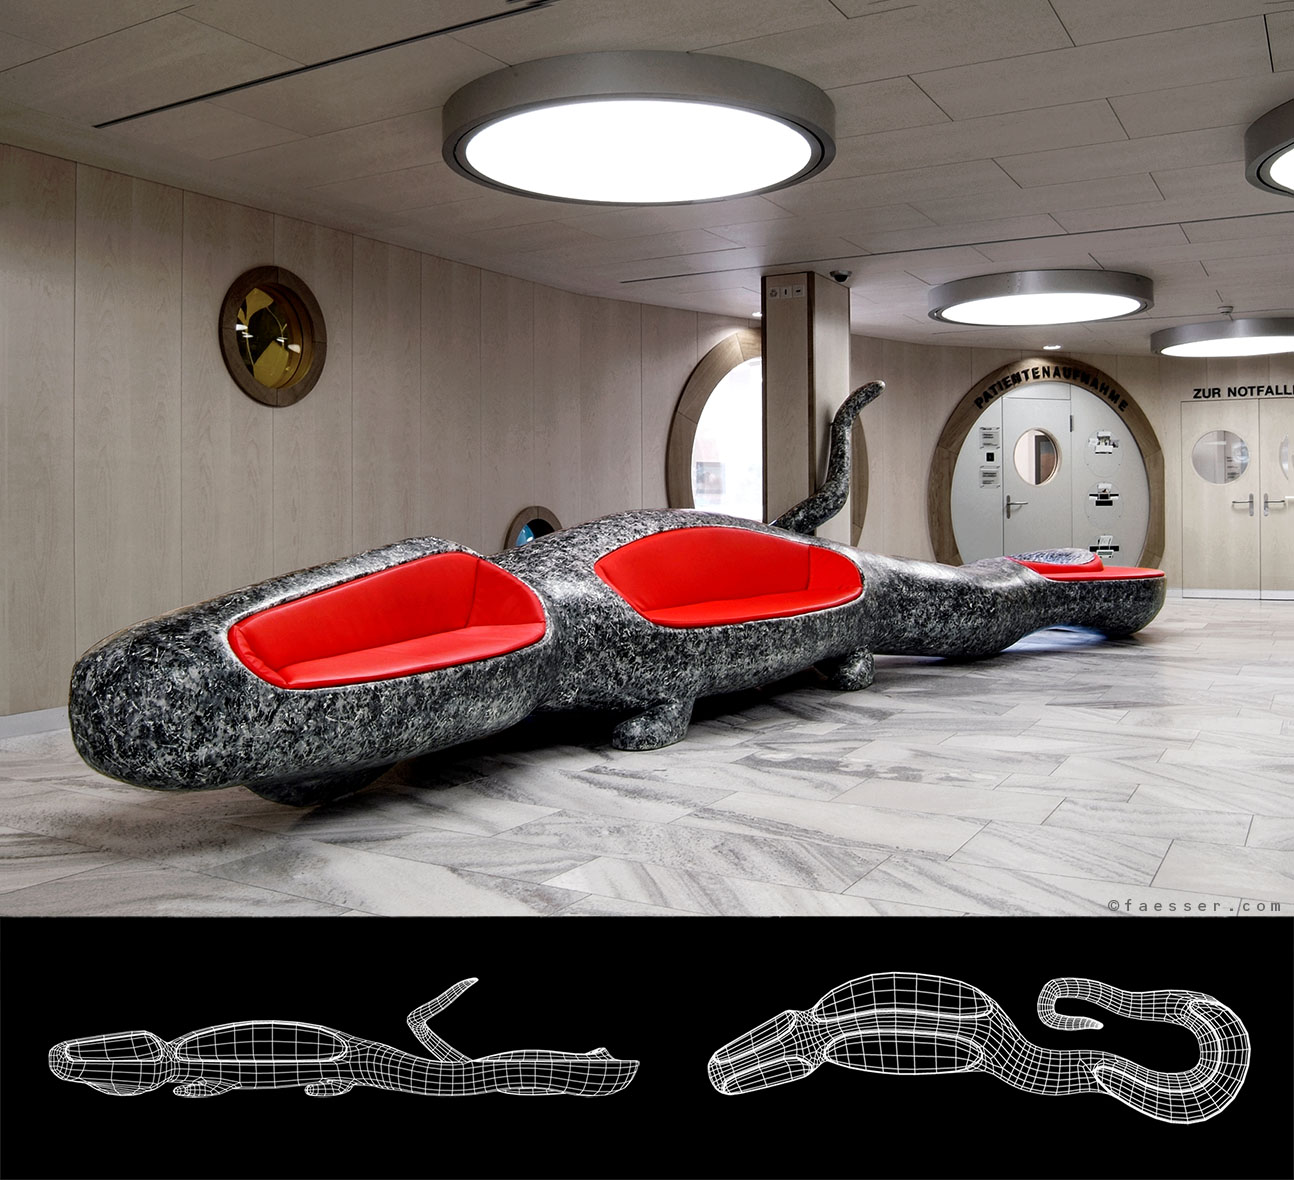 880 cm large crocodile with climbing-seat properties for the Children's Hospital Zurich, sculptor and painter 2005